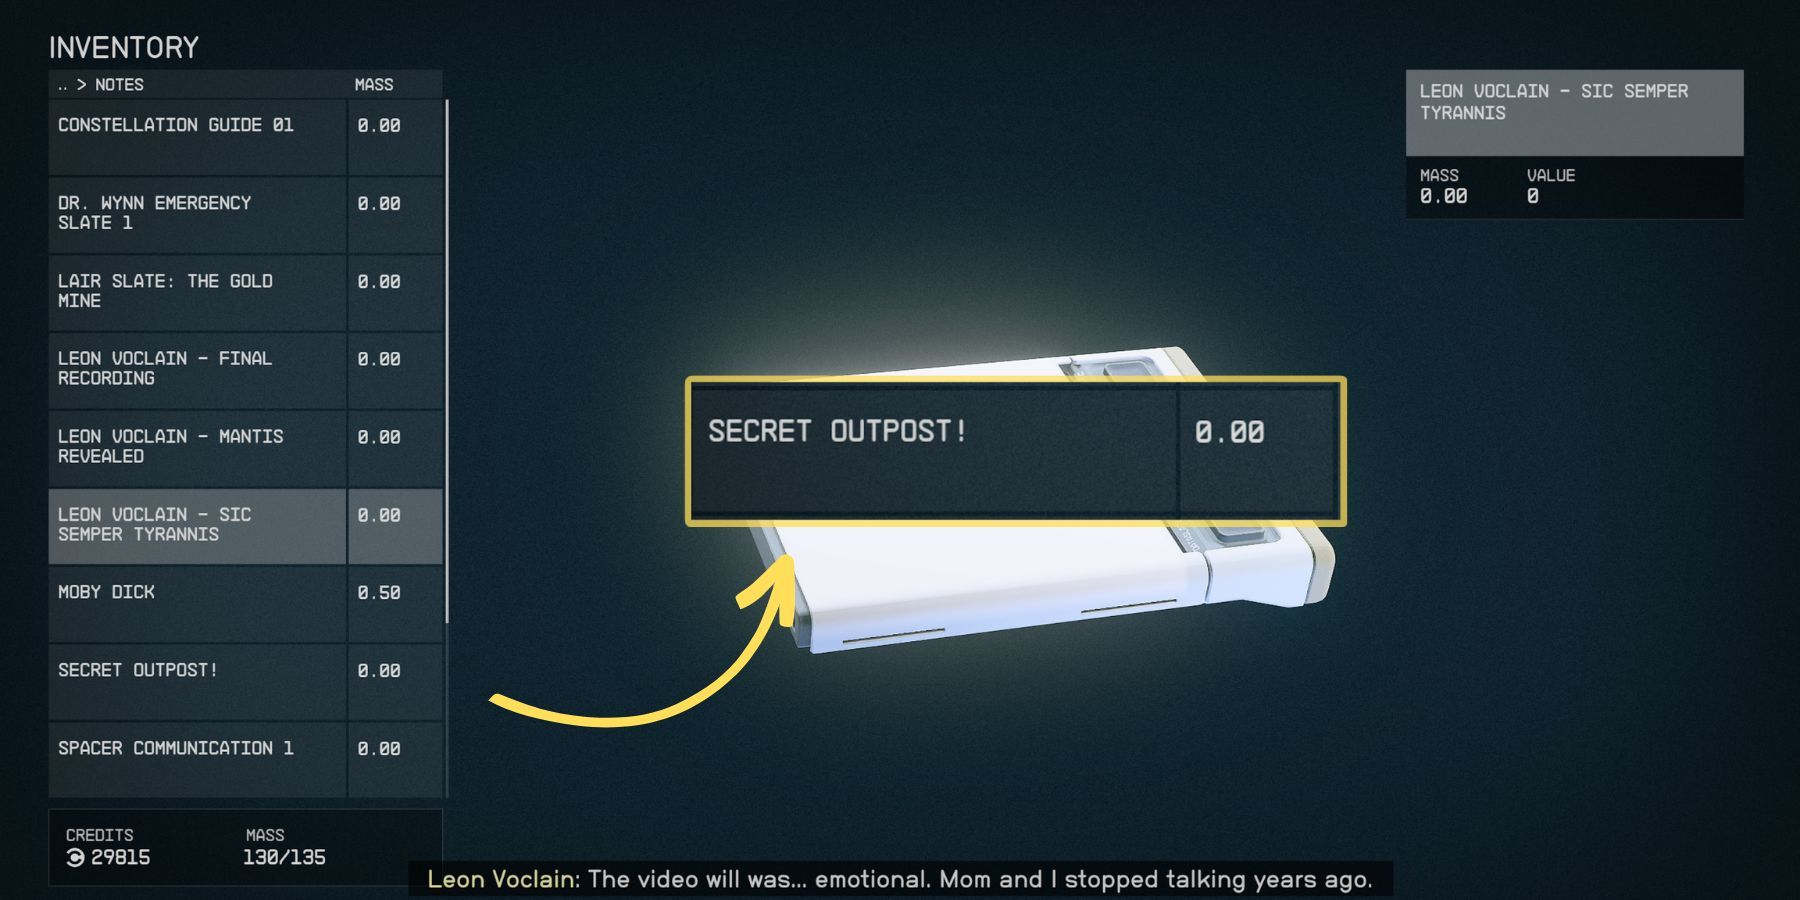 image showing the secret outpost note in starfield which is required for the mantis mission.